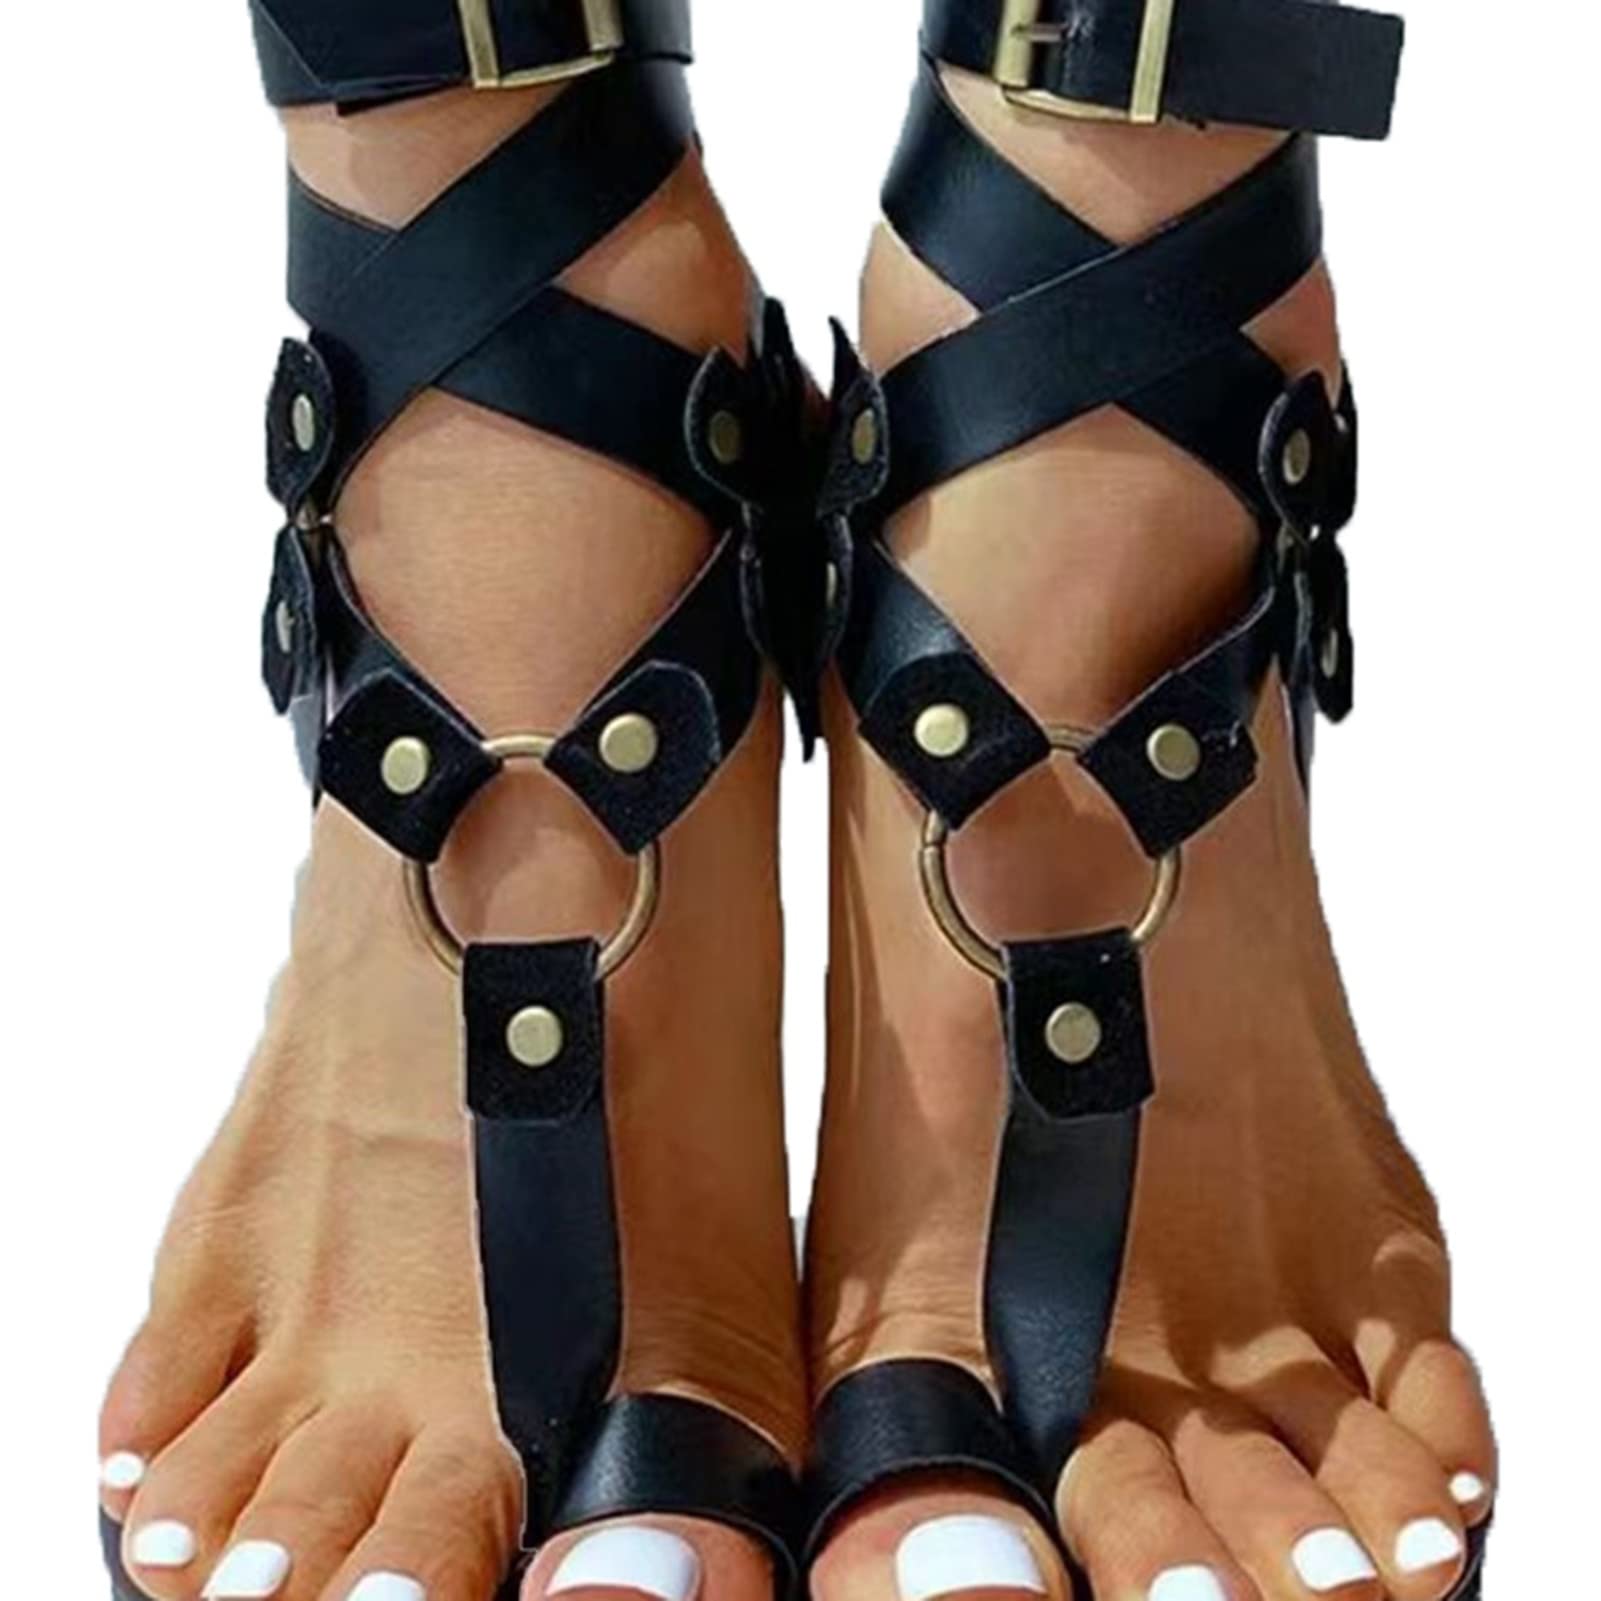 Women Cross Strap Open Toe Sandals Casual Soft Big Toe Foot Correction  Sandal With Orthopedic Bunion Corrector Flat Shoes, price in UAE | Amazon  UAE | kanbkam